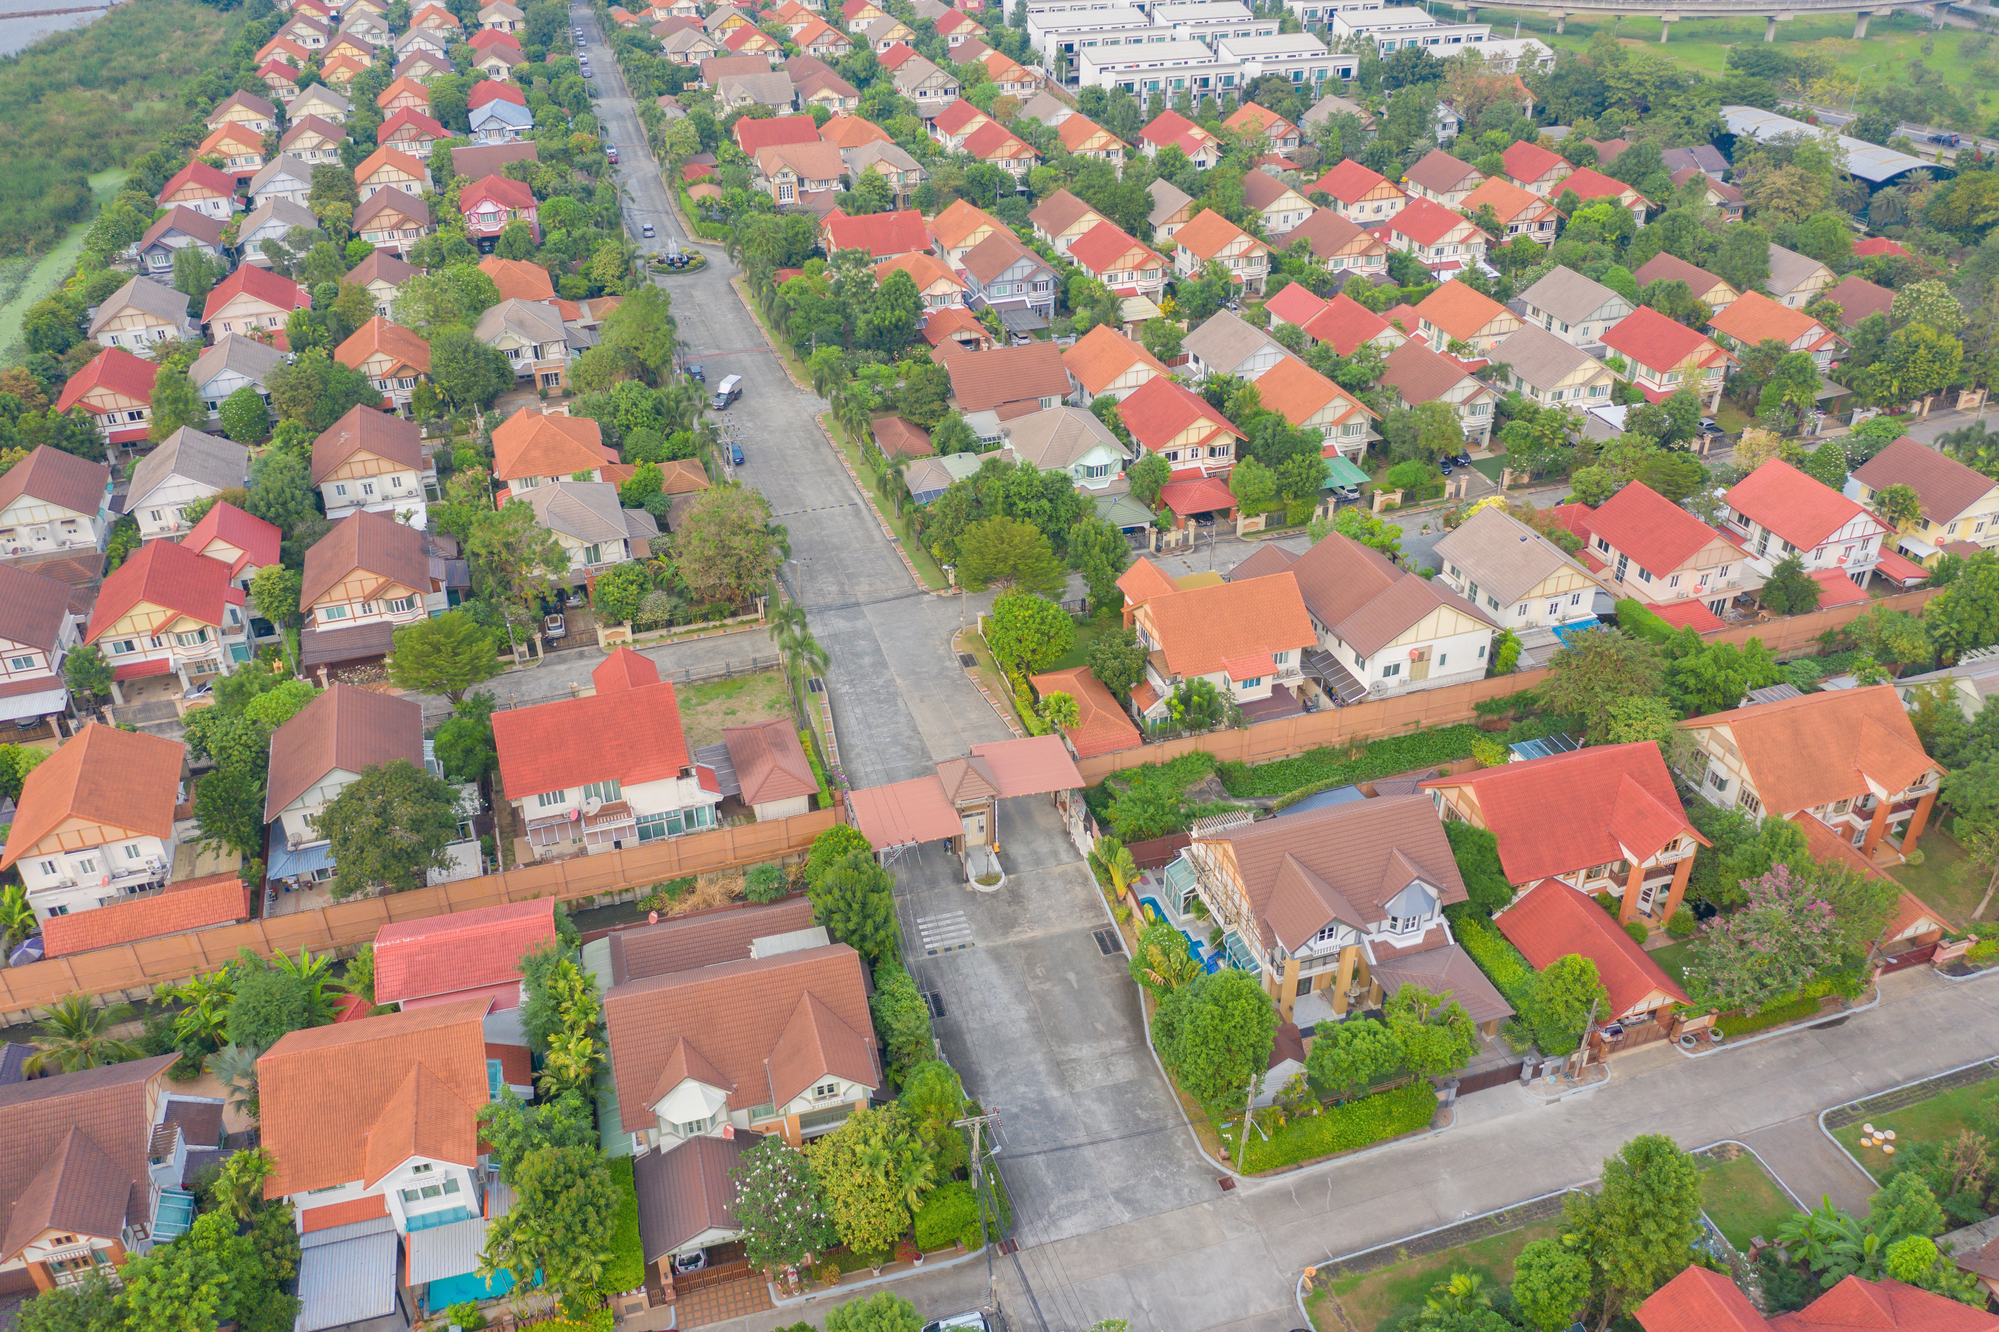 An aerial view of a residential neighborhood in thailand.